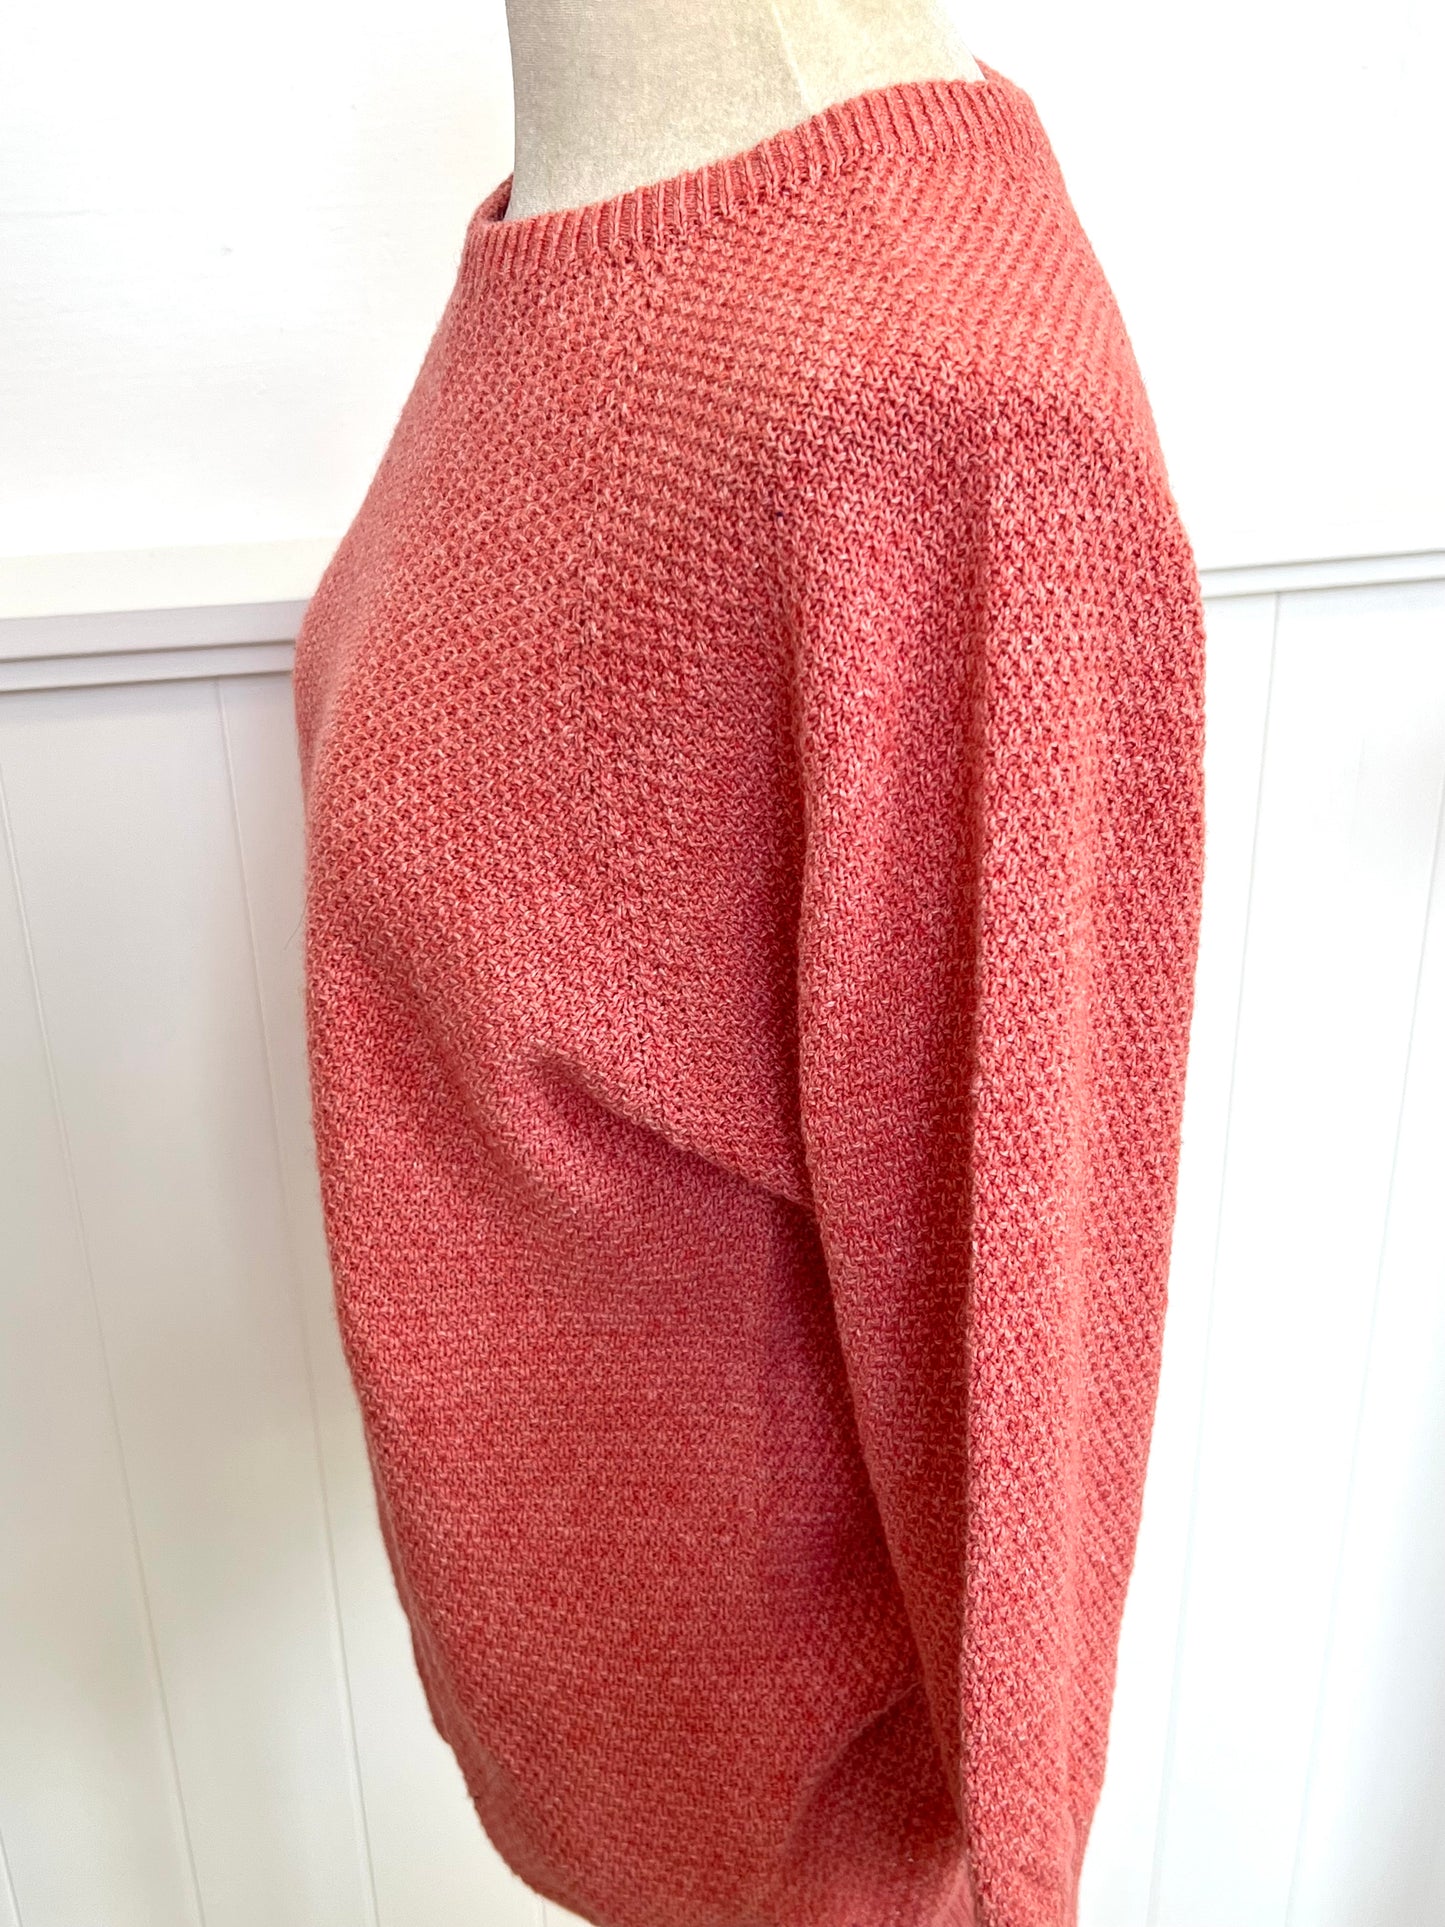 "Penny" Textured Jumper - Coral